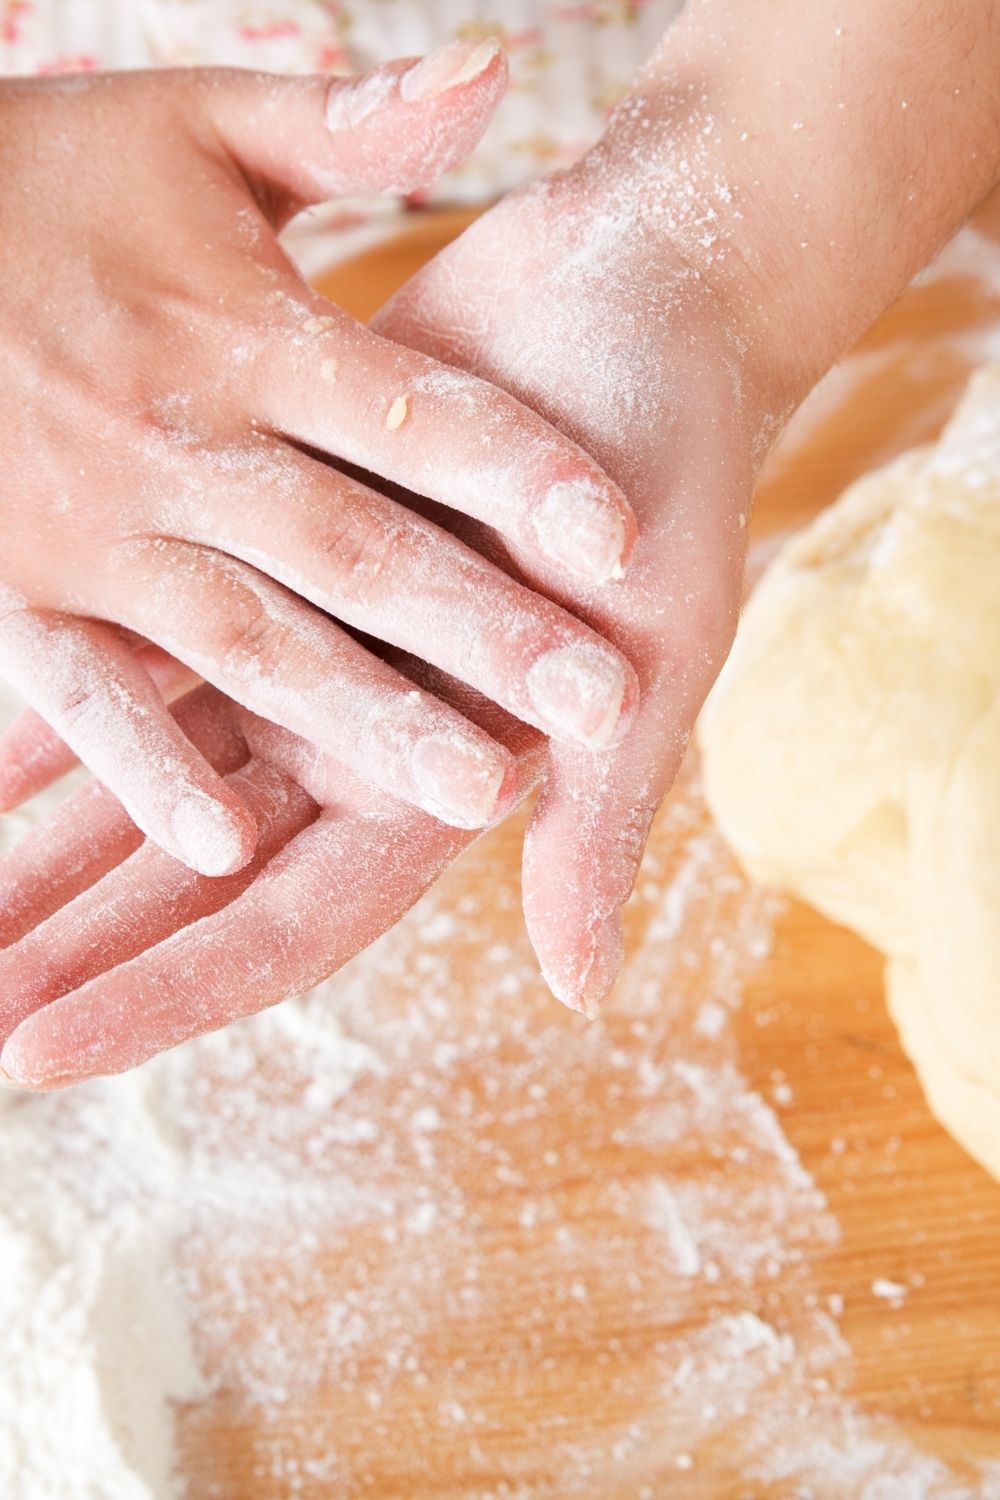 How to knead bread dough without a mixer - The Washington Post